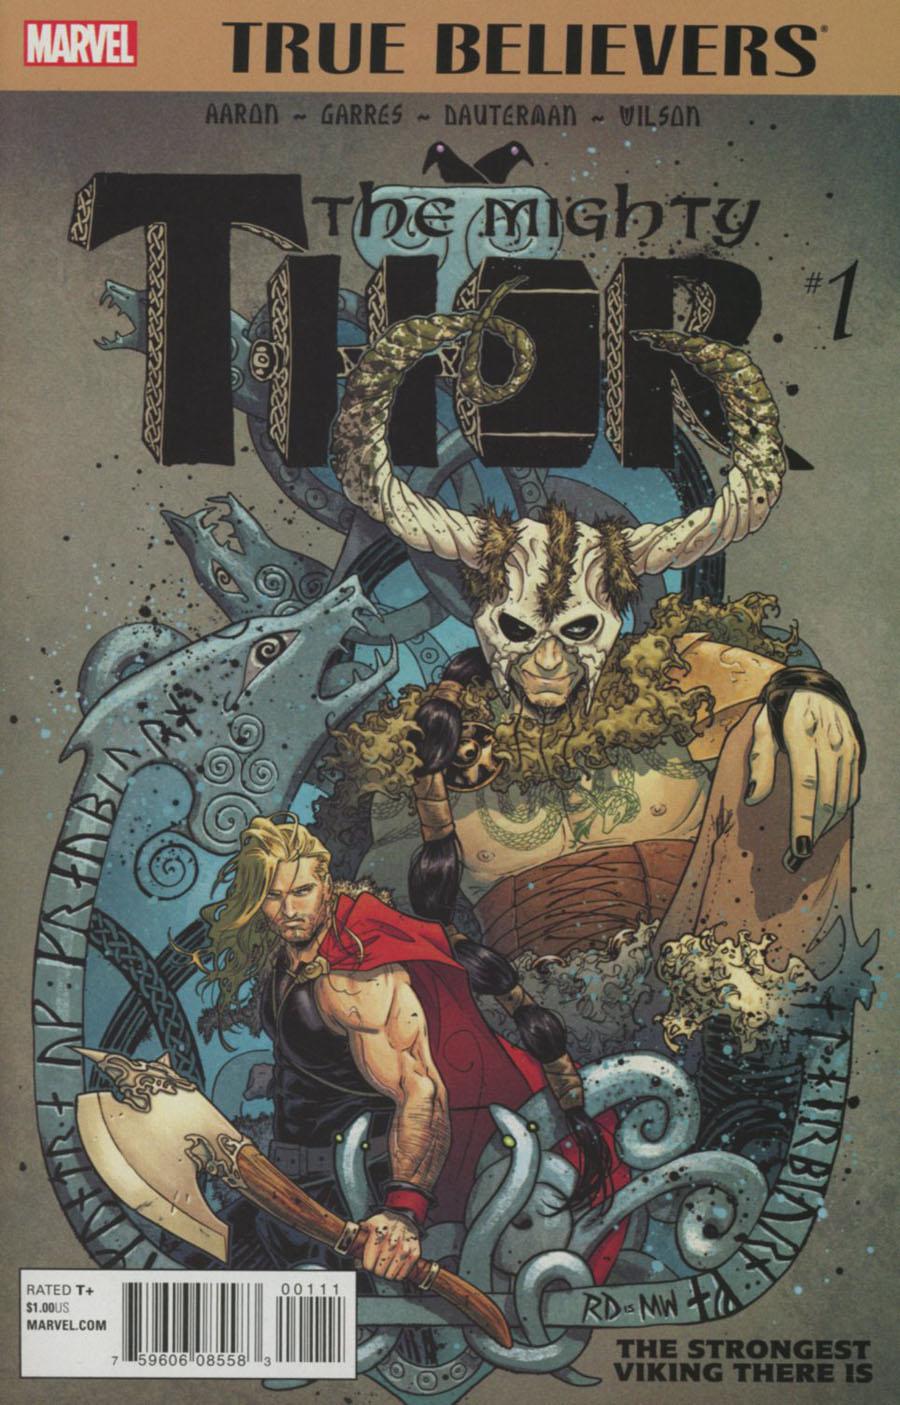 True Believers Mighty Thor Strongest Viking There Is Vol. 1 #1